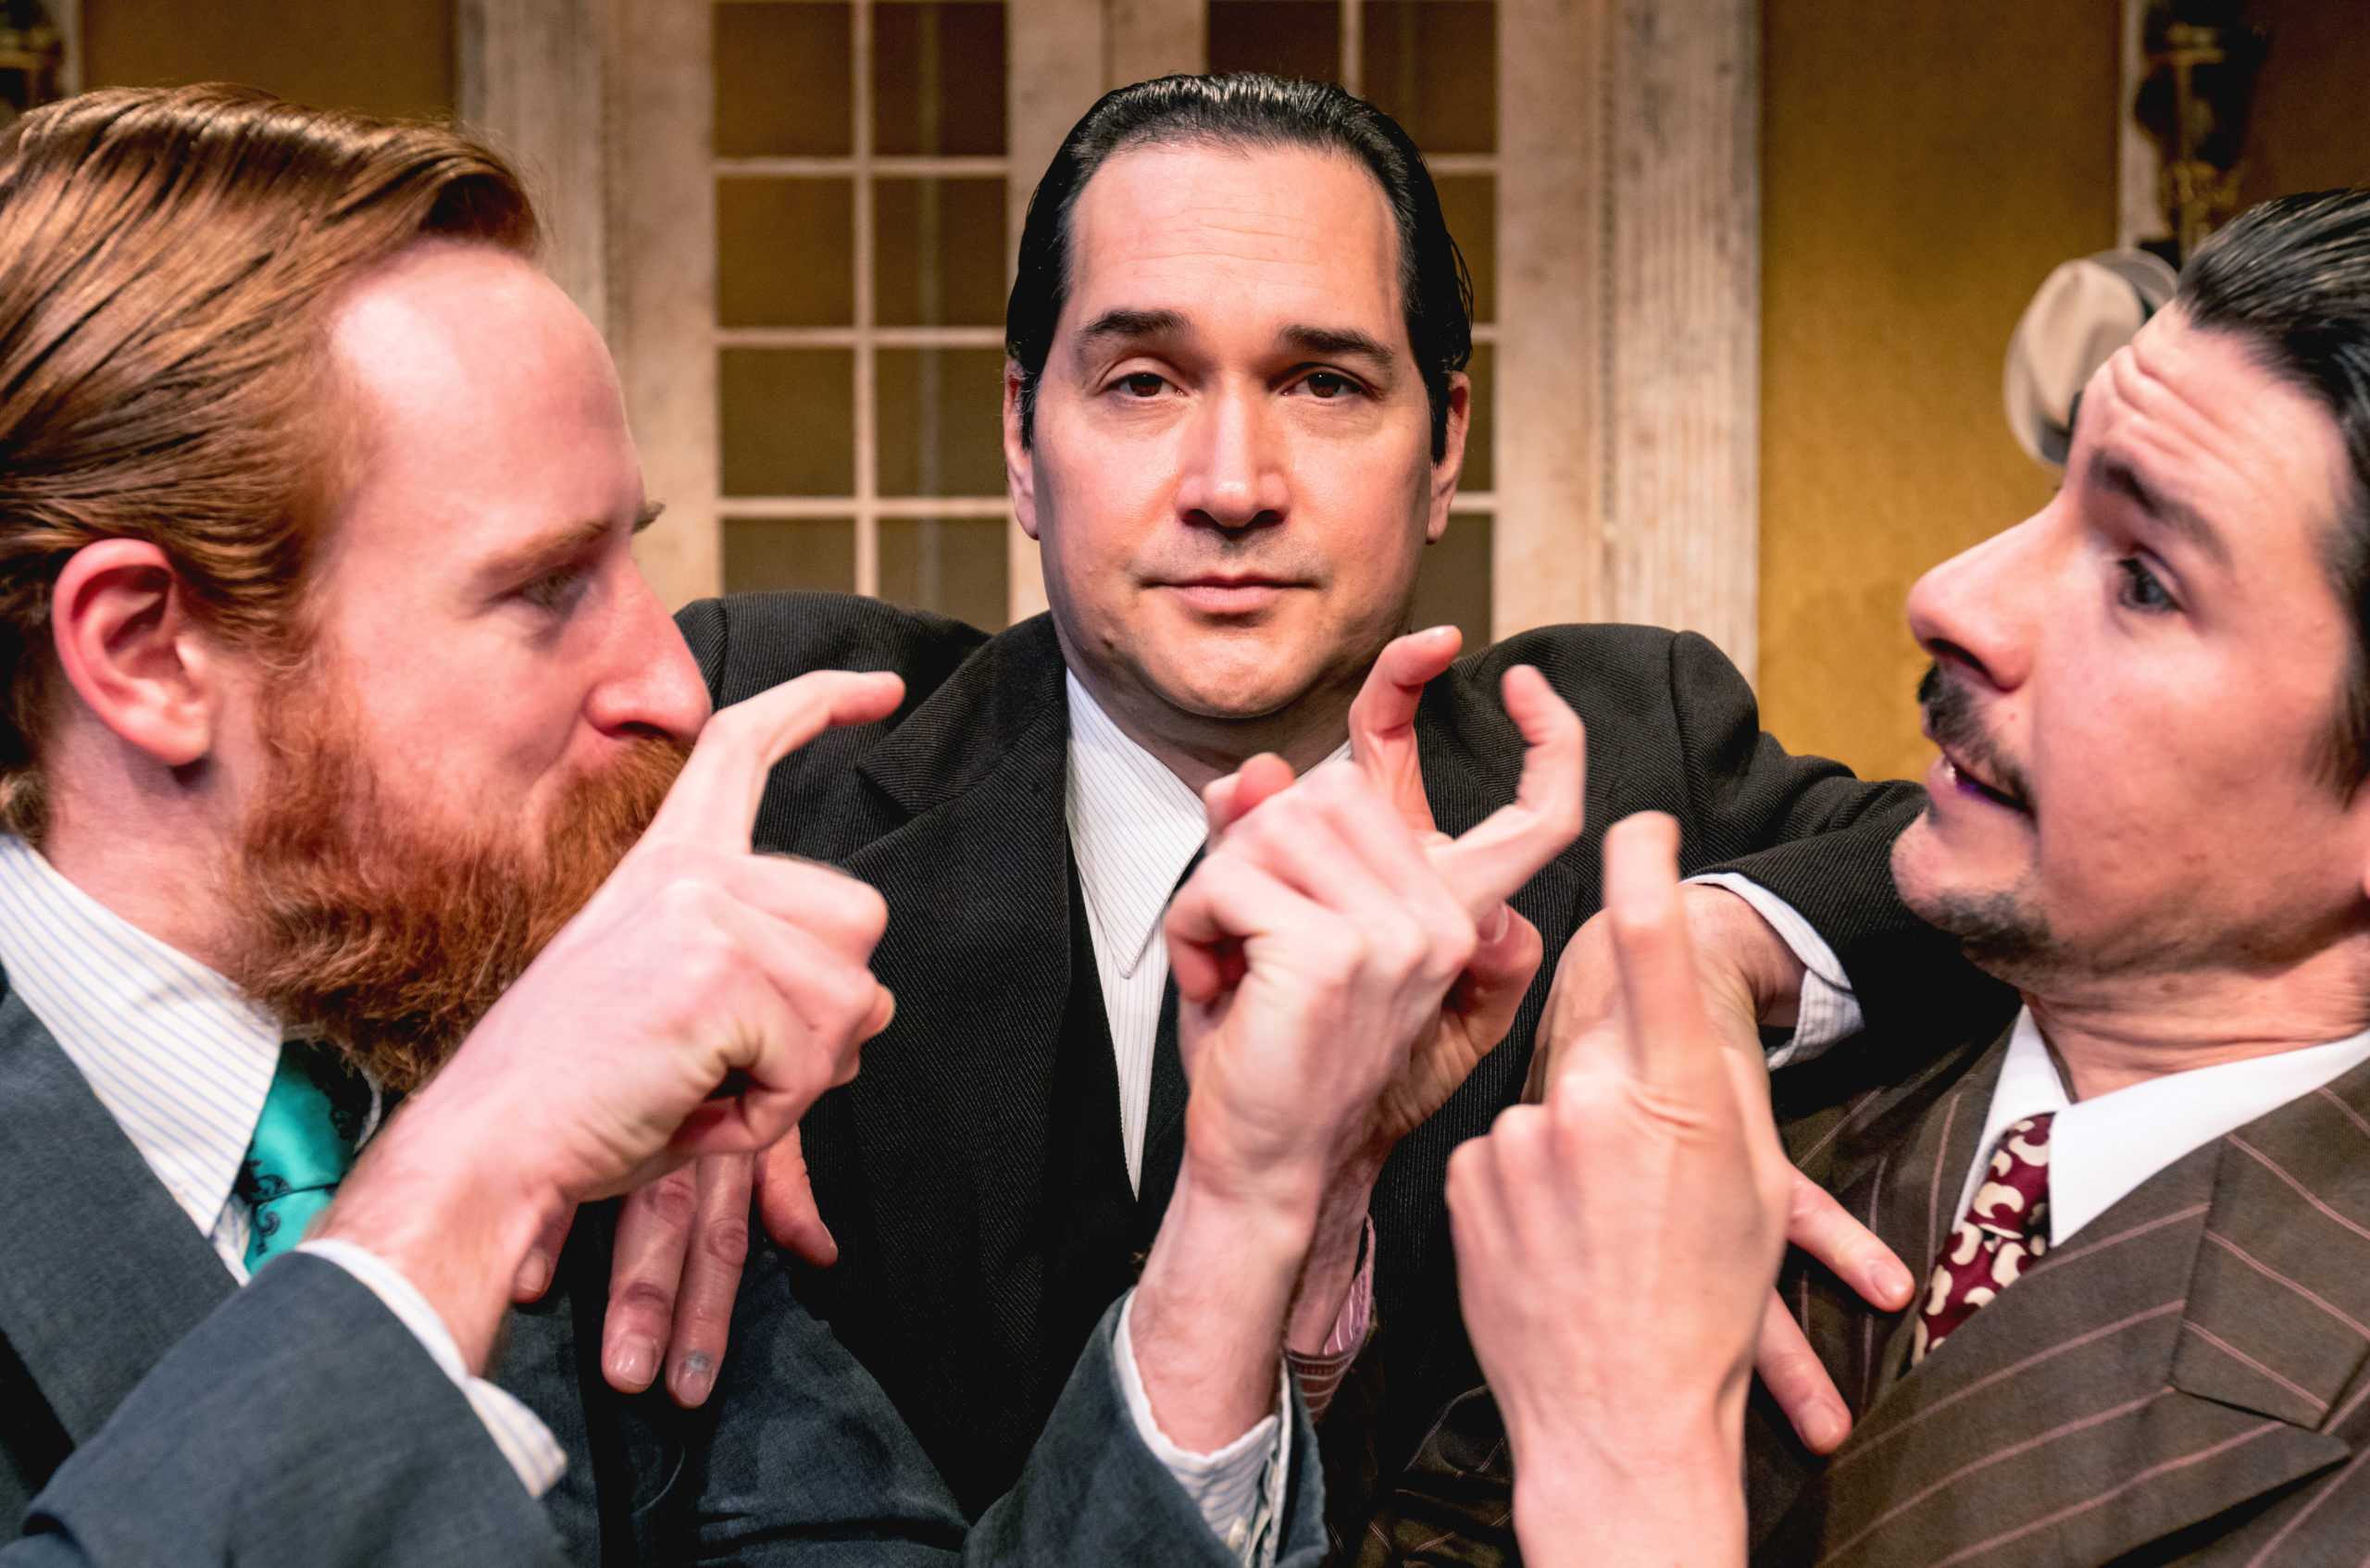 Left to right: Calder Shilling, Richard Nguyen Sloniker, and Miguel Castellano in Jeeves Takes a Bow at Taproot Theatre. Photo by Giao Nguyen.